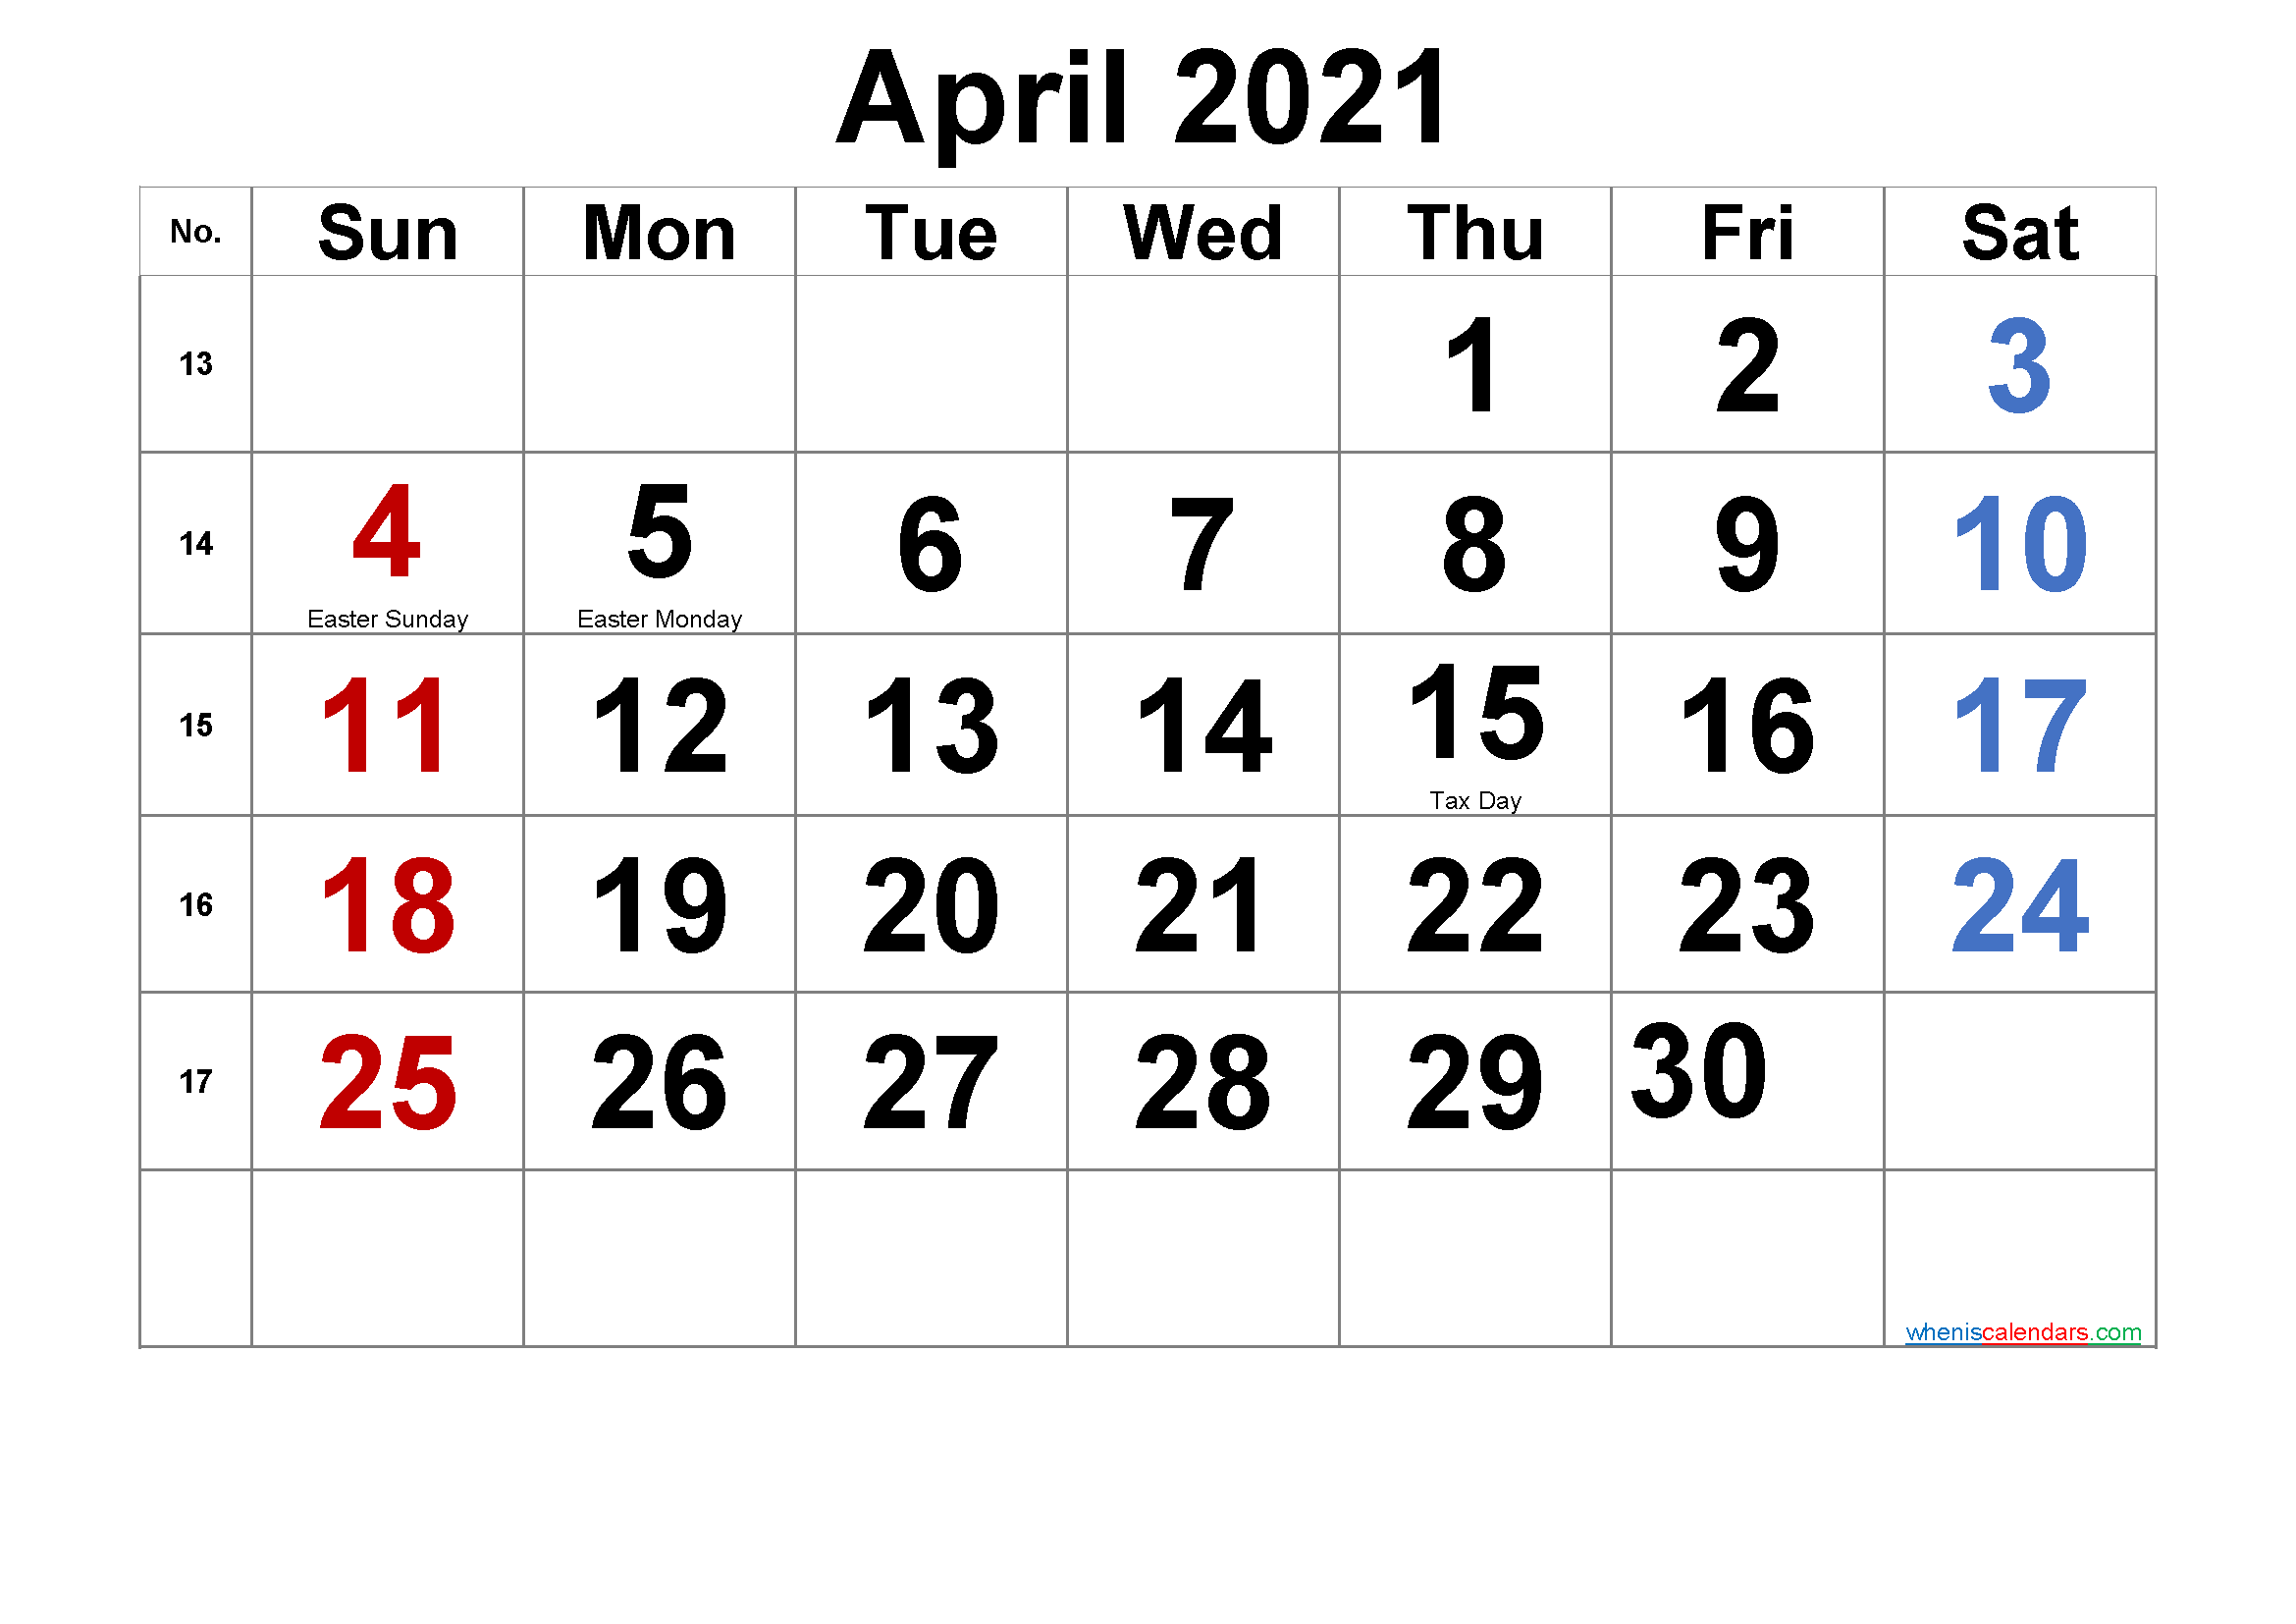 Calendar For March And April 2021 With Holidays | Calendar ...